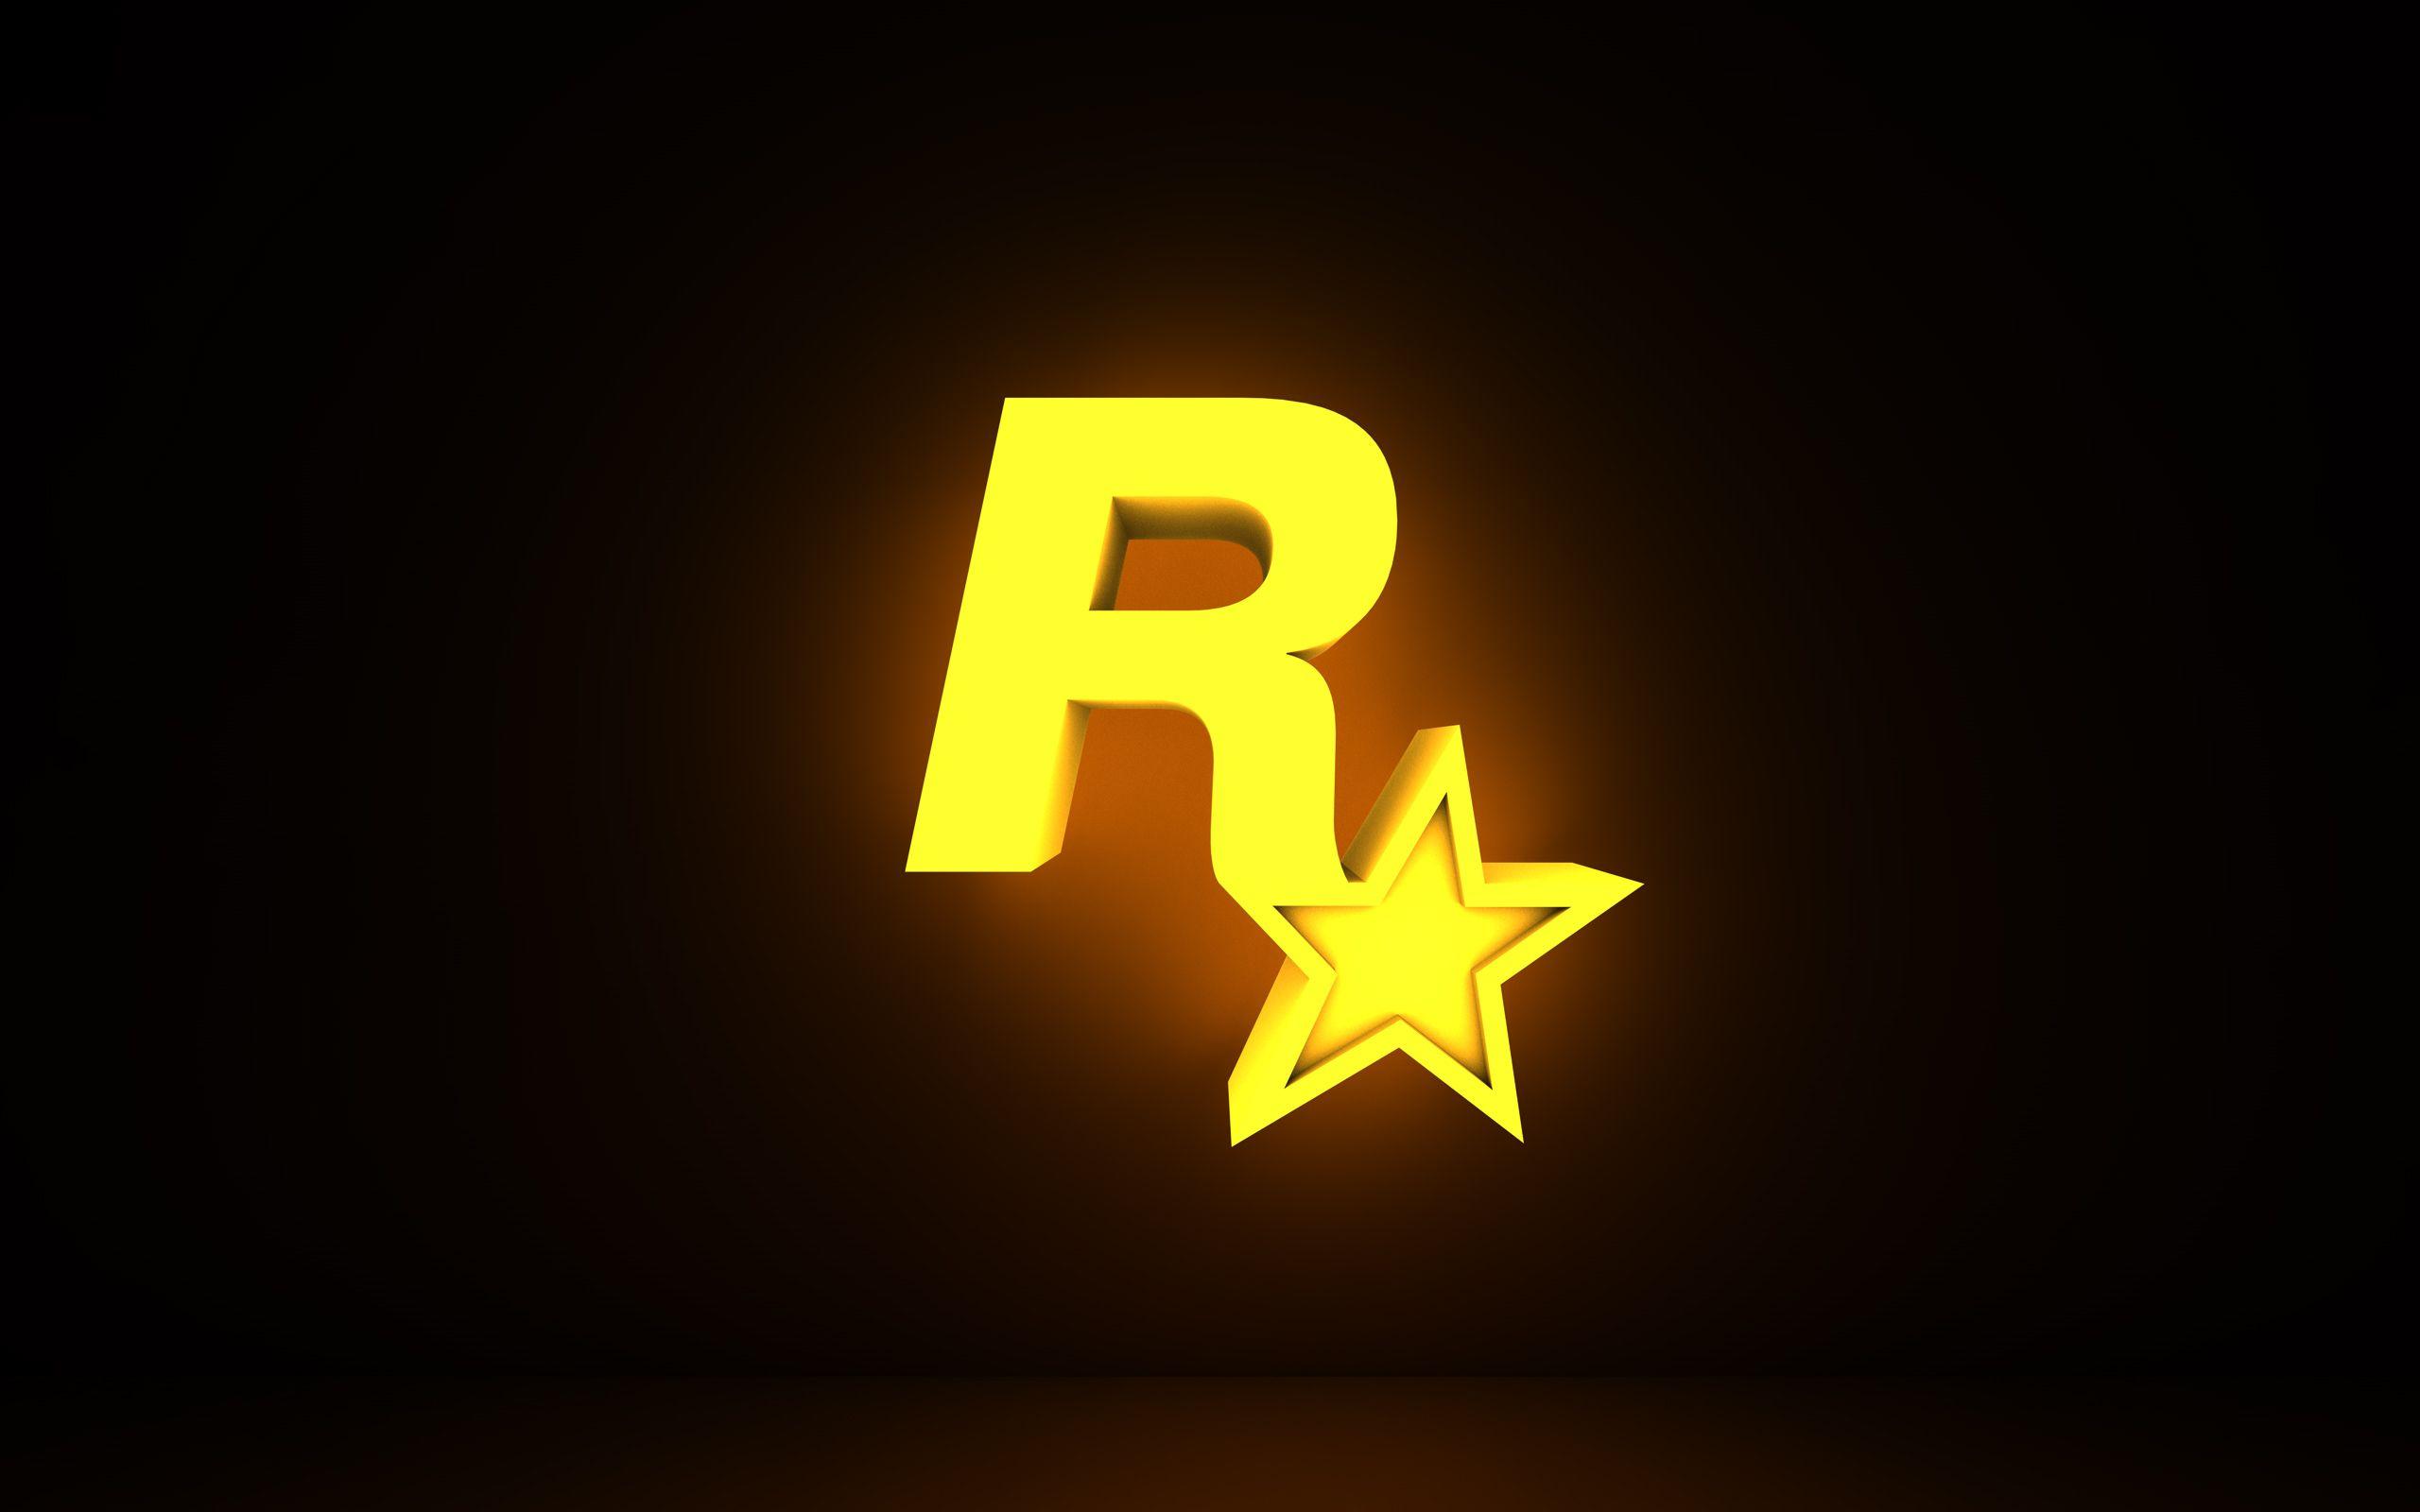 R Star Logo - Take Two Interactive Stock Up 300% Over Last 5 Years: What's Next